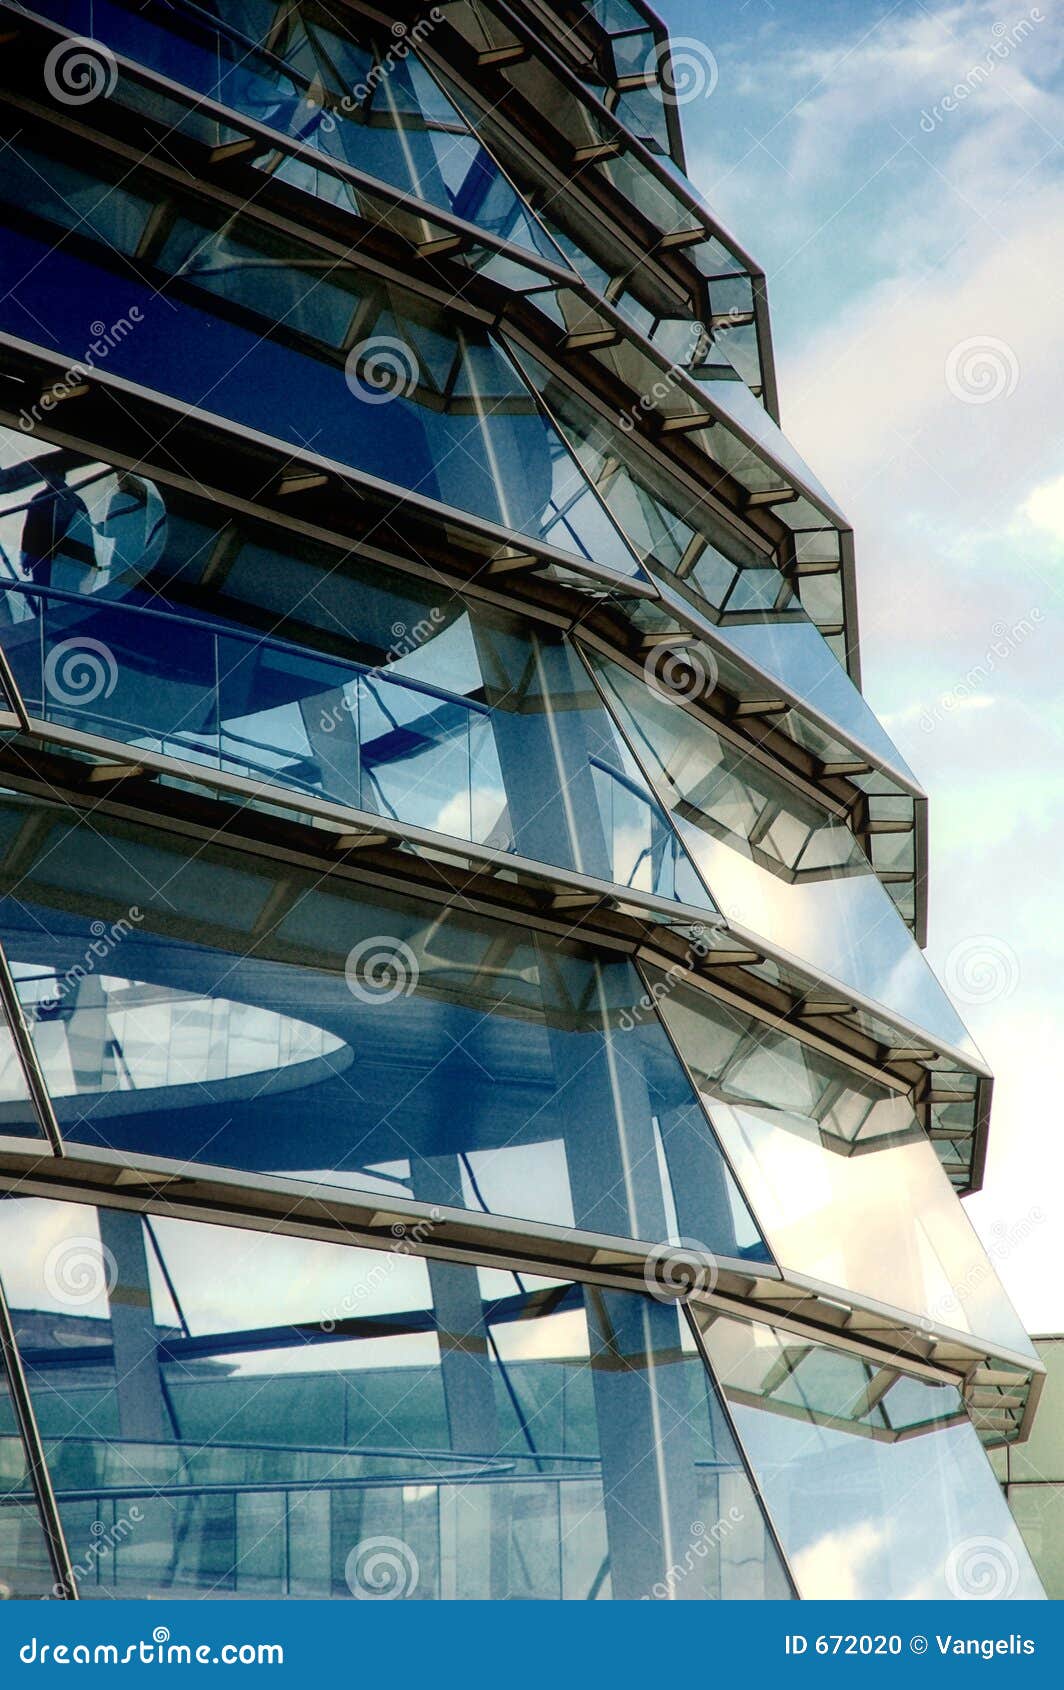 reichstag dome - outside view